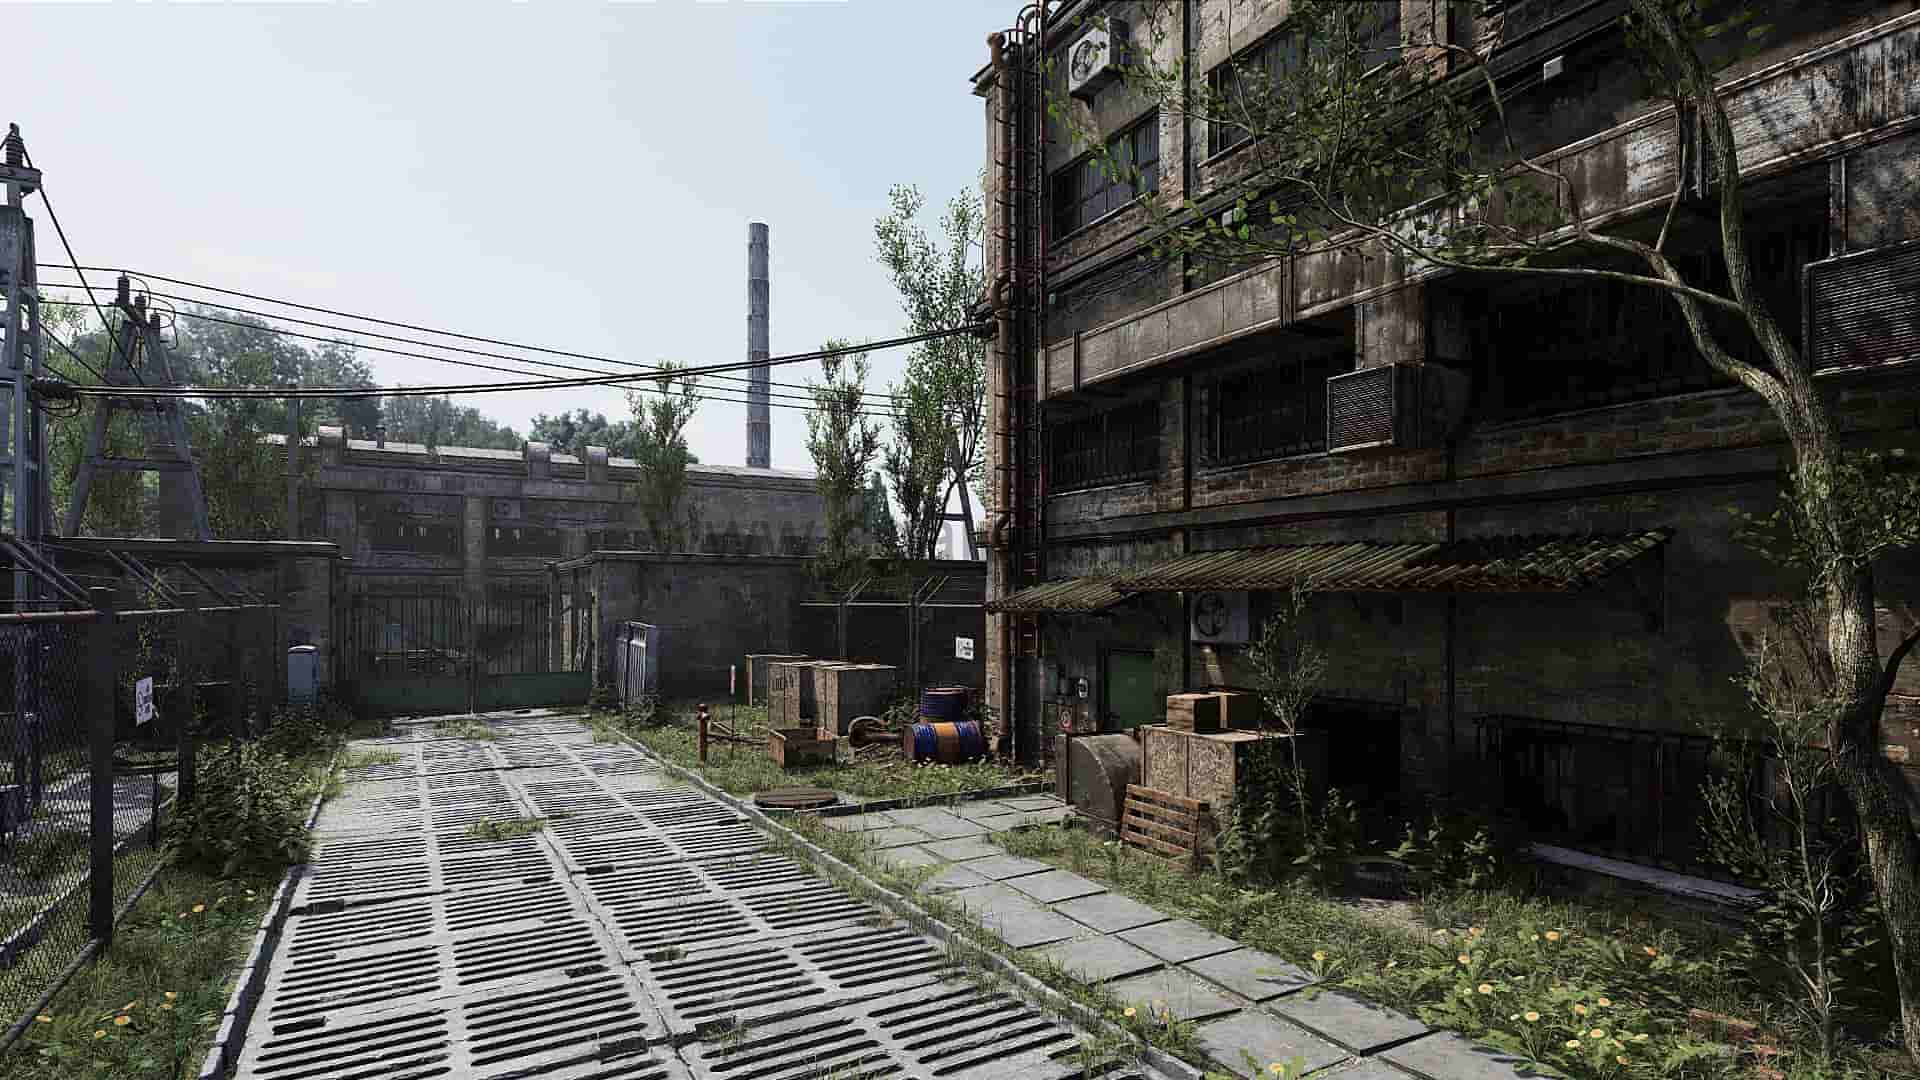 【UE4】全实时工业环境 Full Realtime Industrial Environment